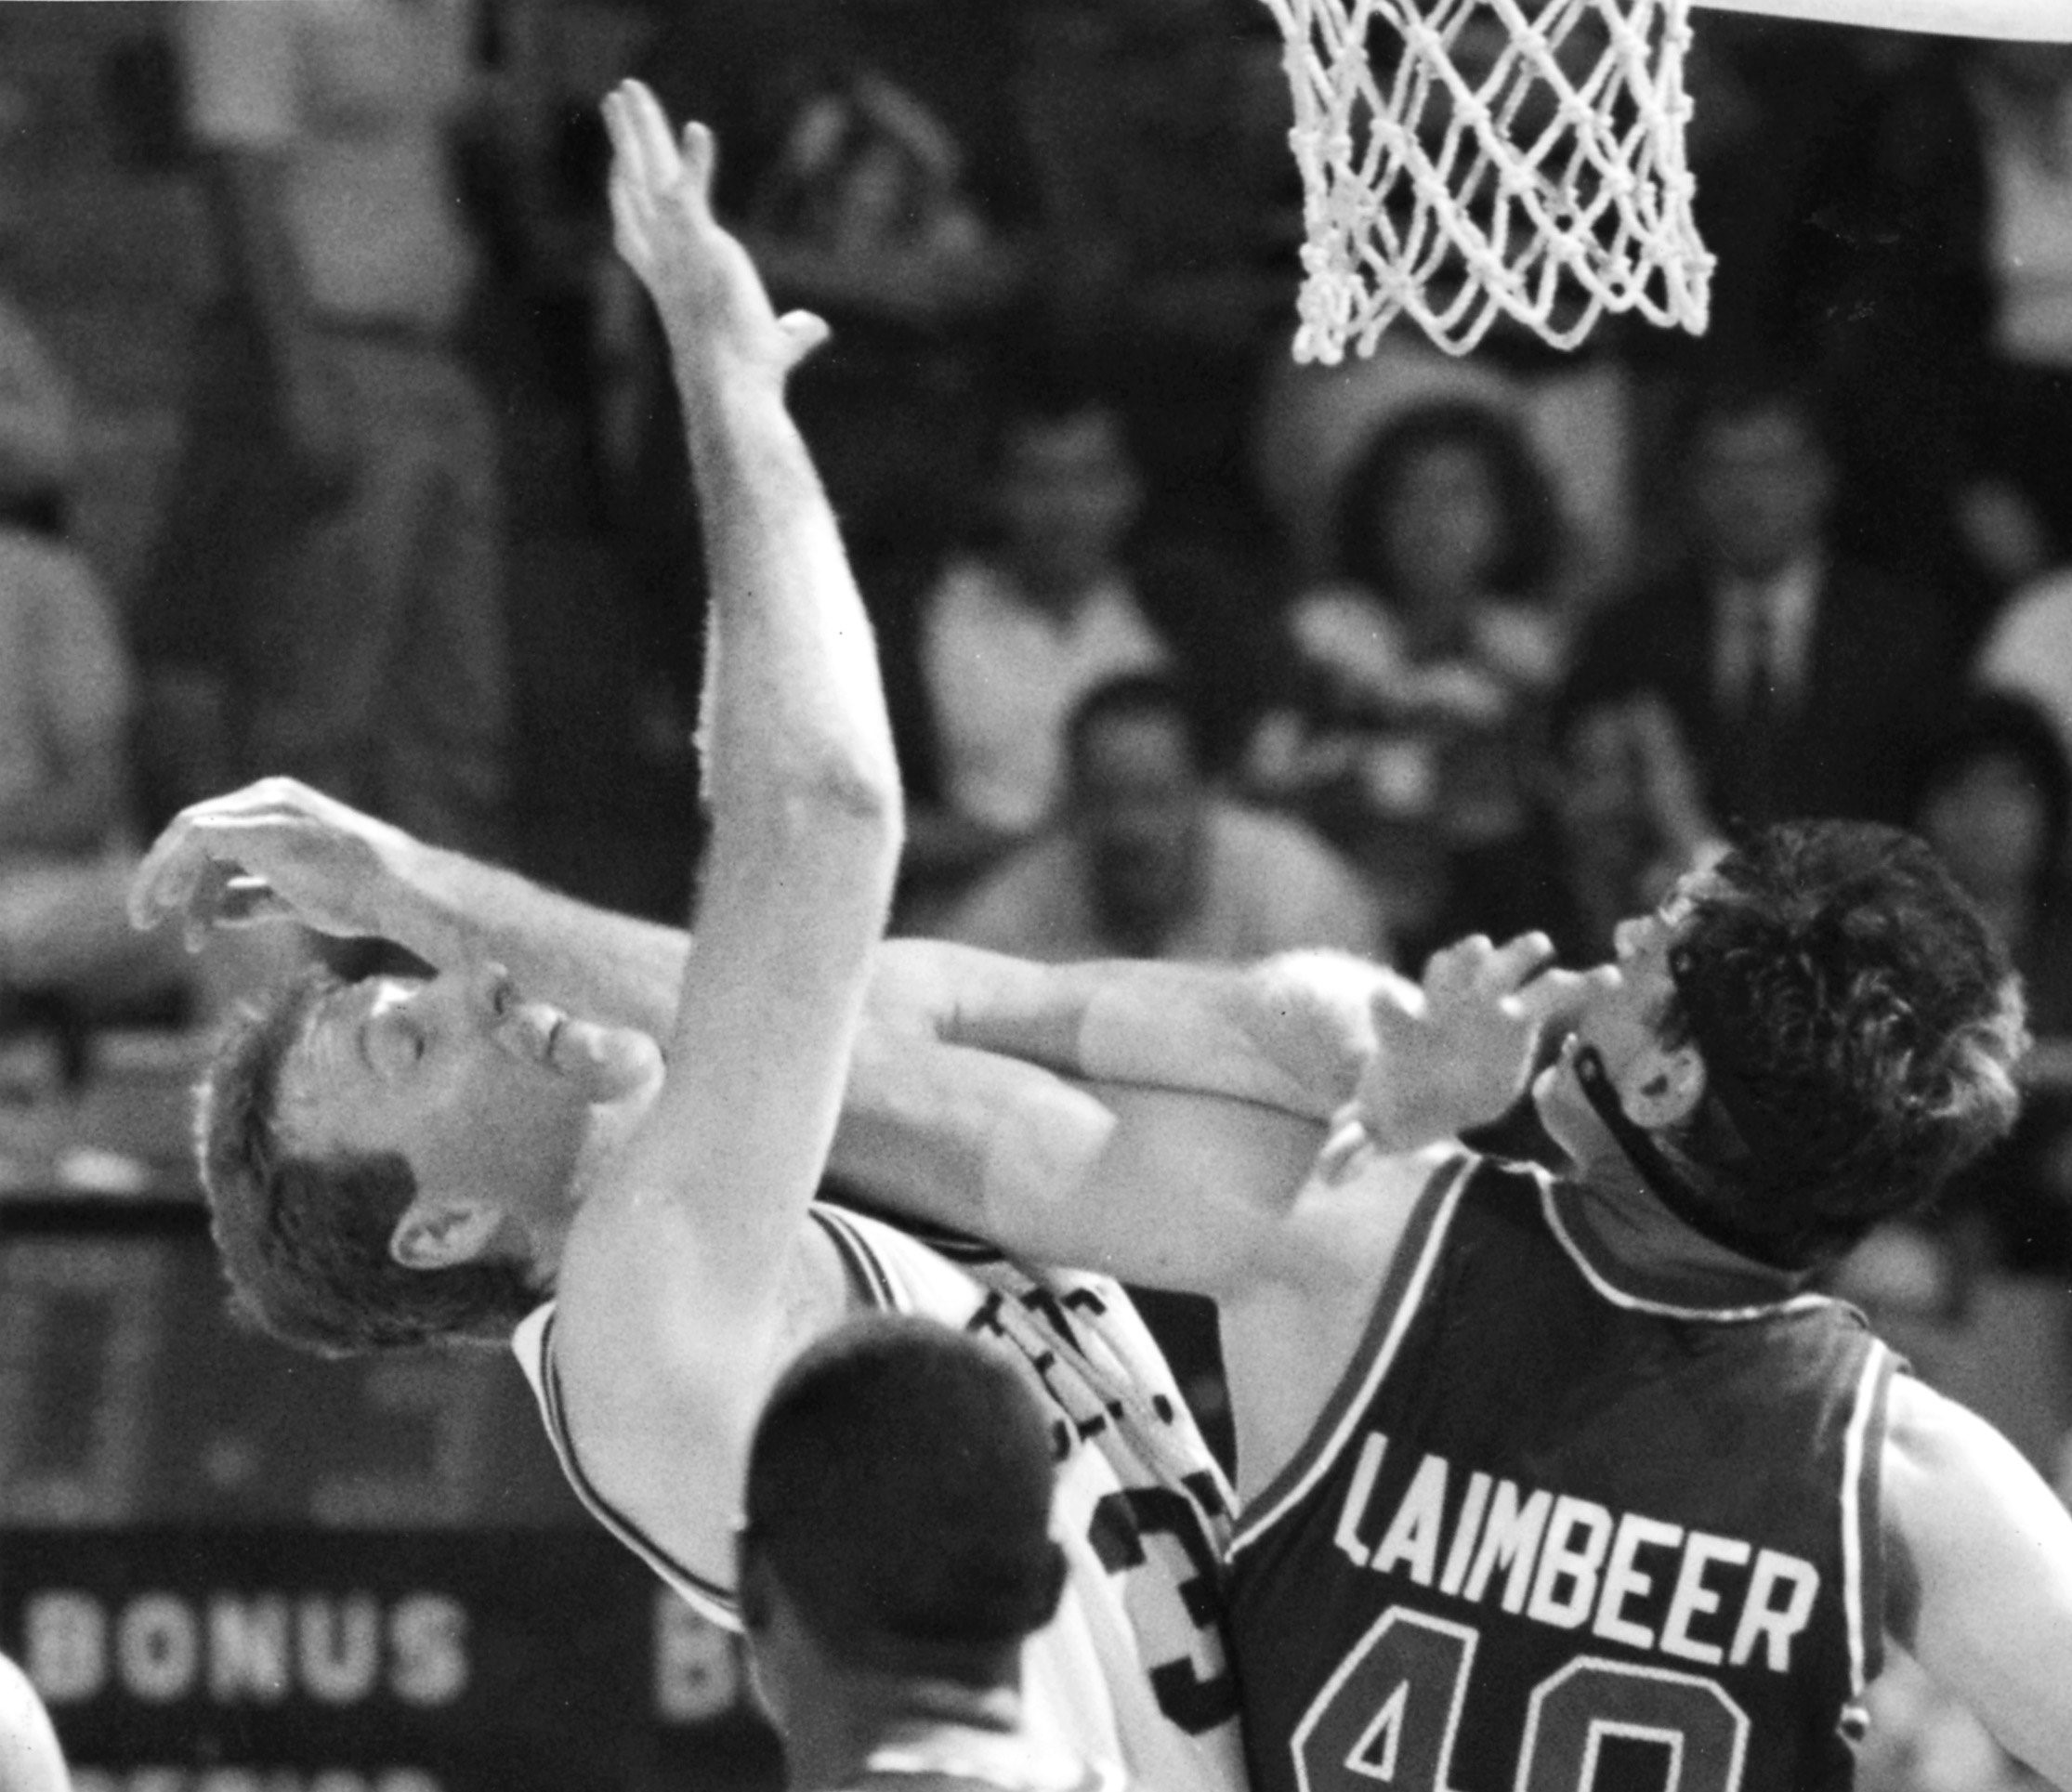 Boston Celtics forward Larry Bird takes an arm in the face from the Pistons Bill' Laimbeer.